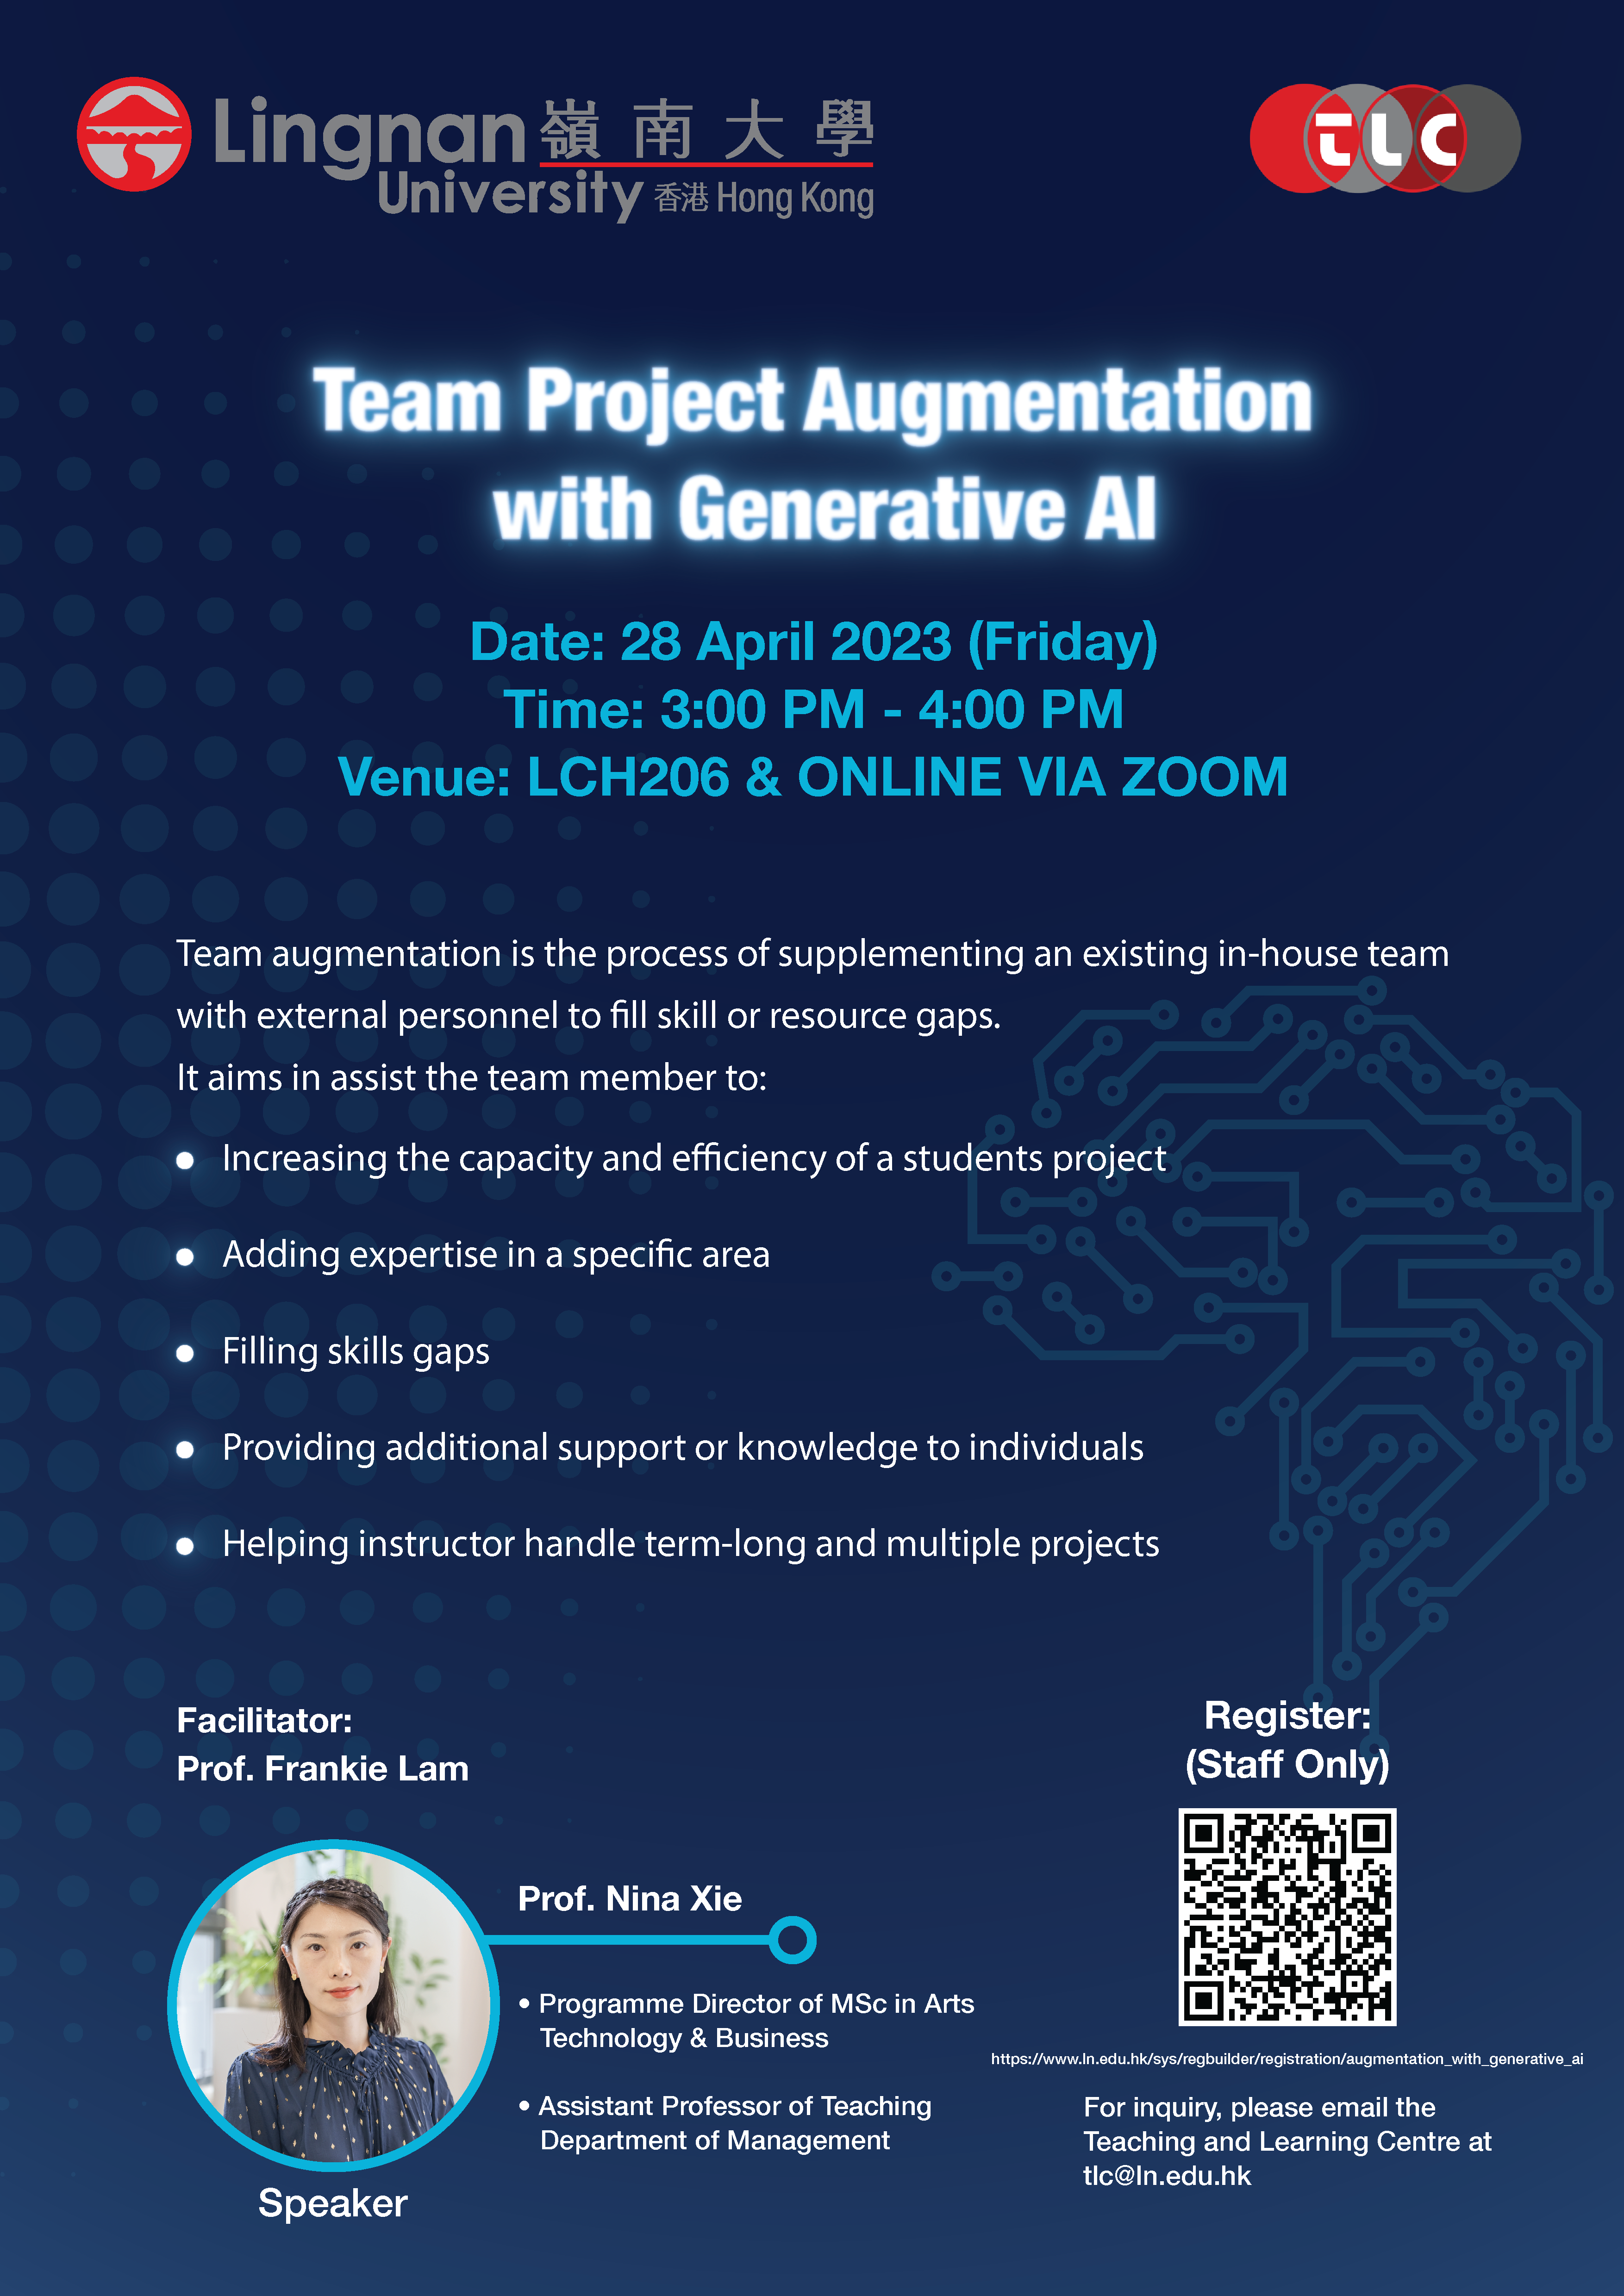 Team Project Augmentation with Generative AI